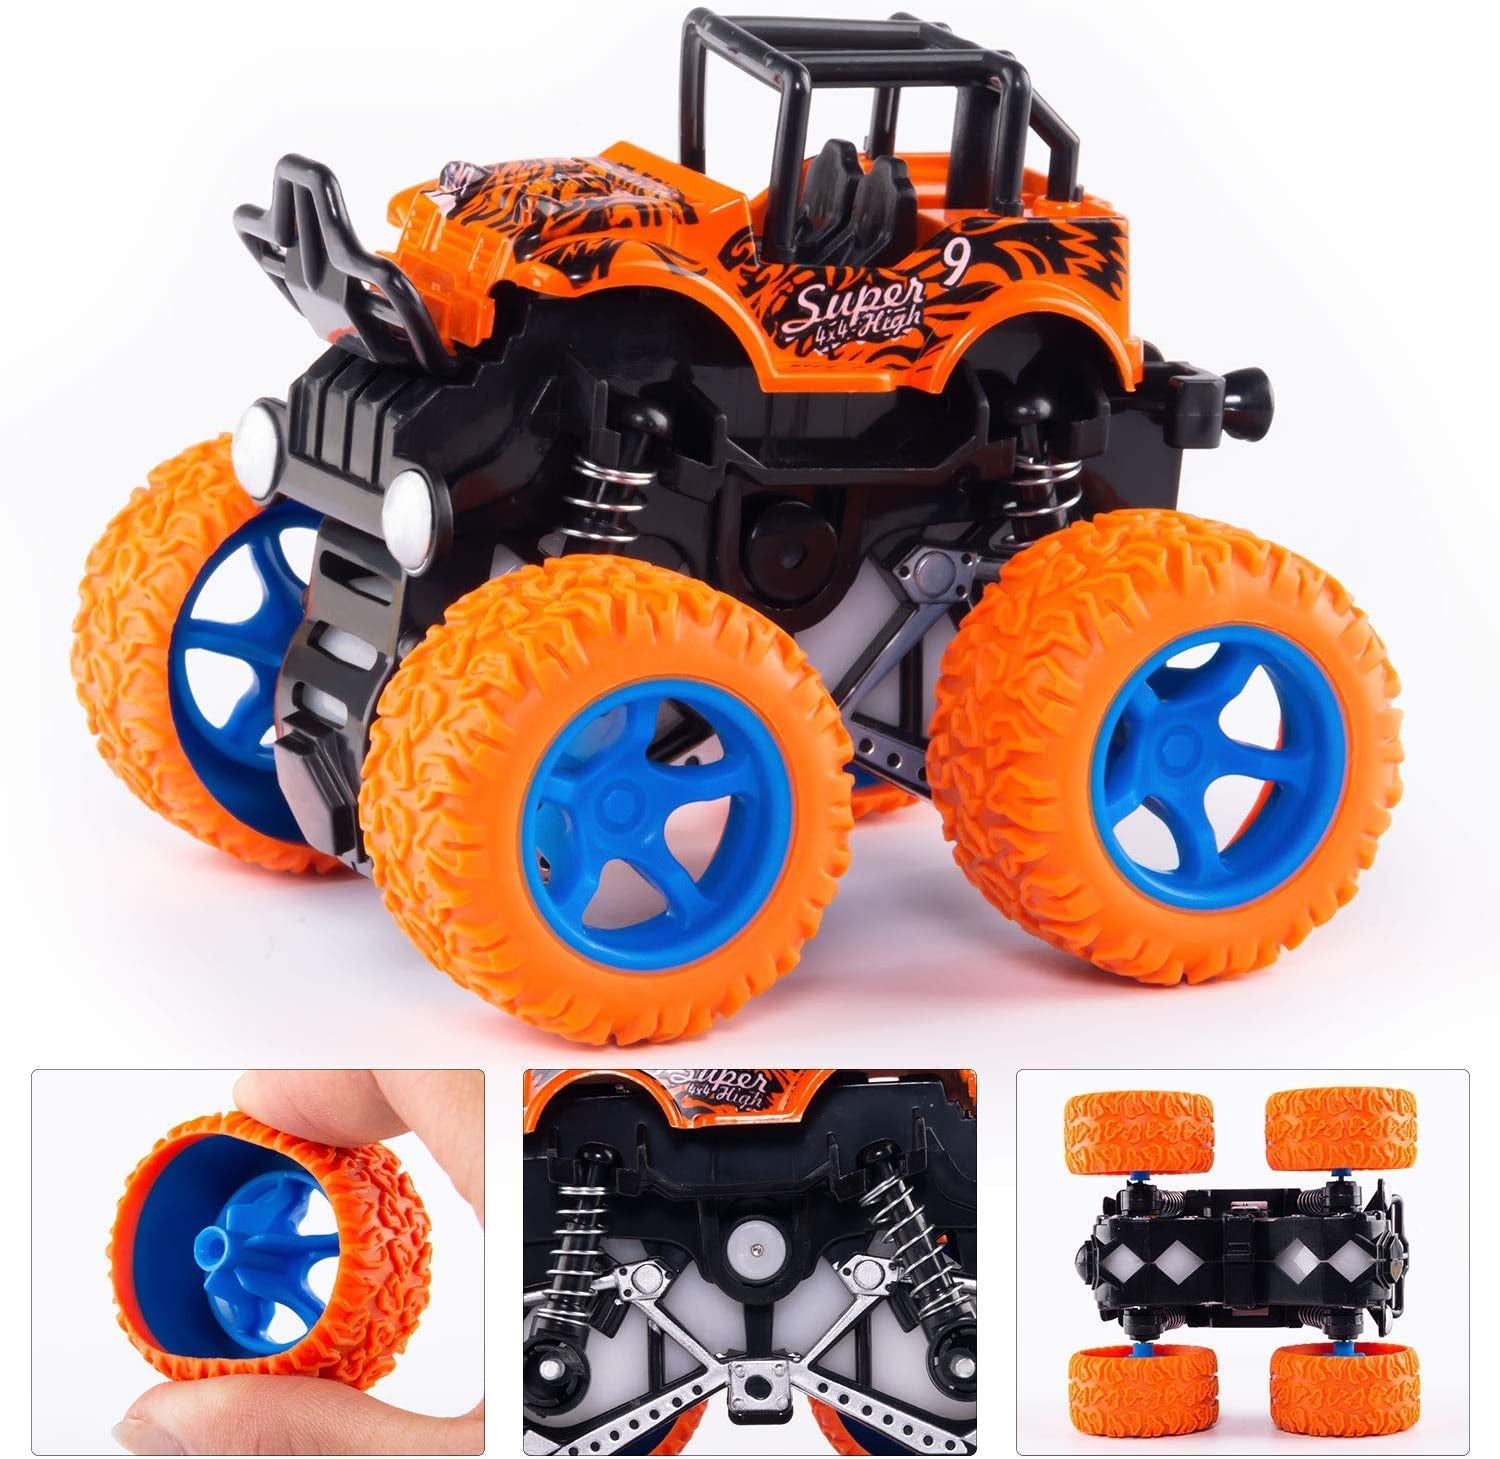 4 Pack Monster Truck Toys for Boys and Girls, Inertia Car Educational Toy Cars, Friction Powered Push and Go Toy Cars, Christmas Gift Birthday Party Supplies for Toddlers Kids (4 Color)